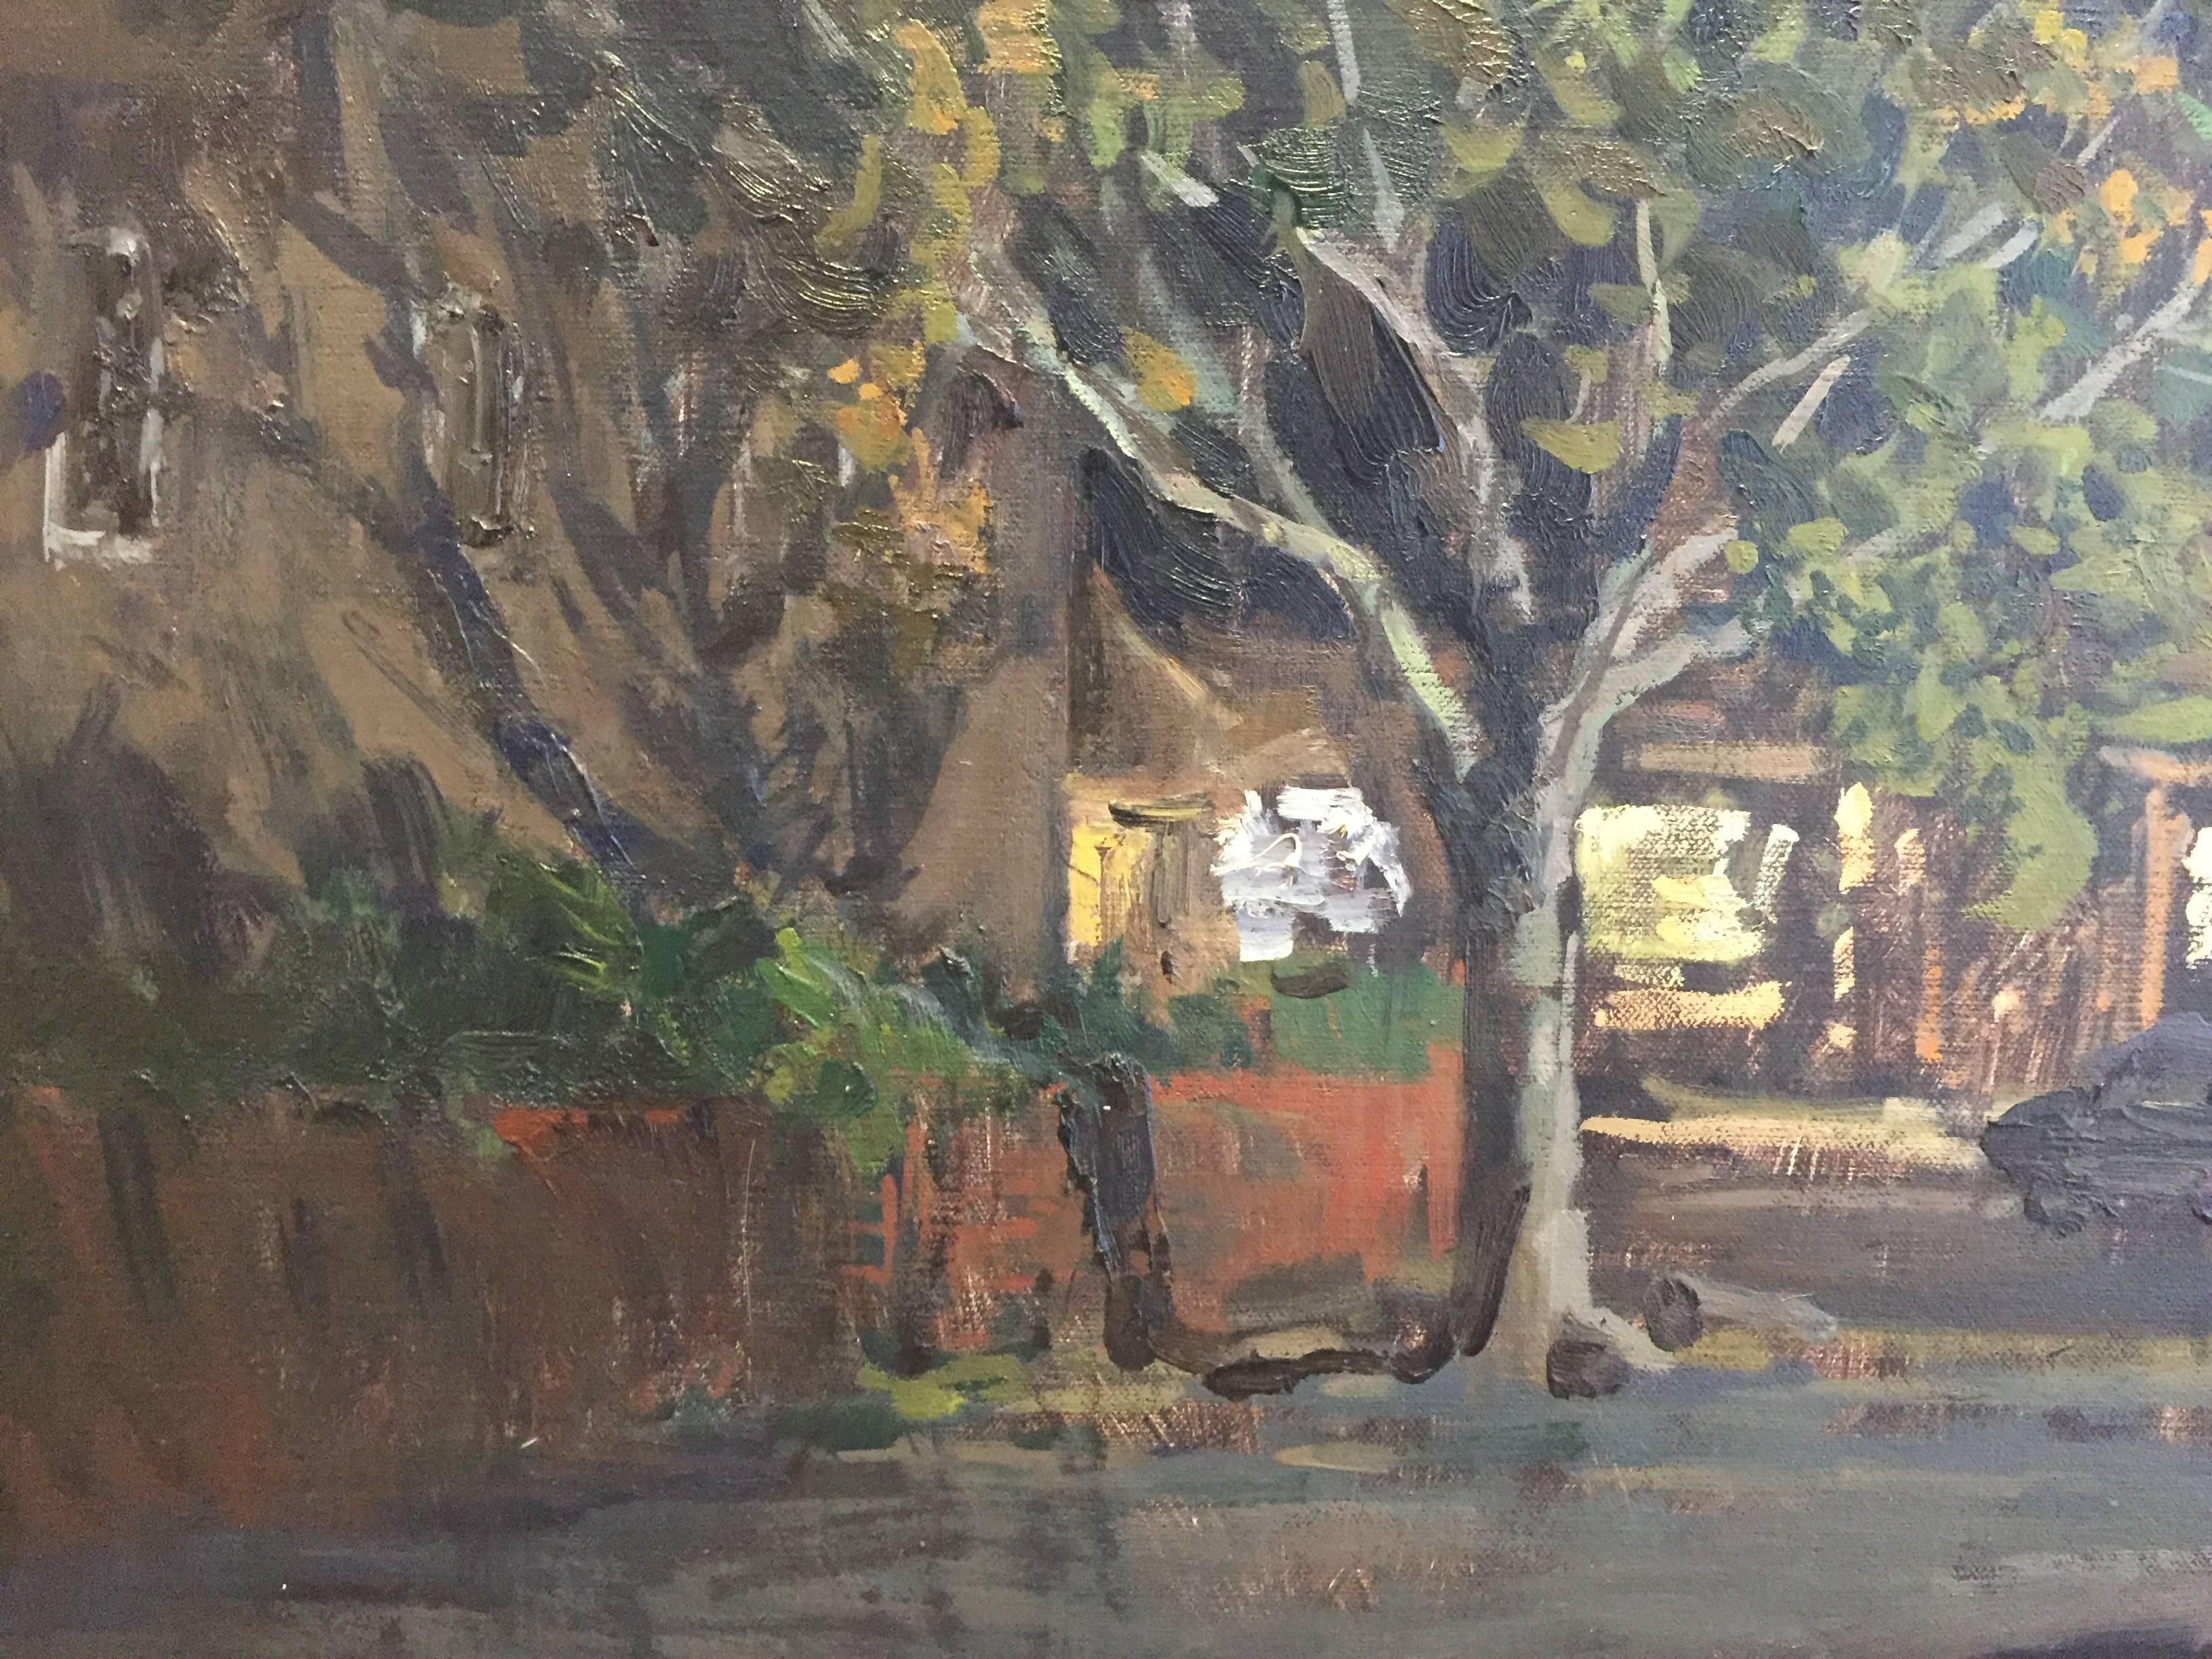 Painted en plein air, in Sag Harbor, New York. Situated in the People's United Bank parking lot, Butko looks over to the opposite side of Main Street. Beneath tall, fully bloomed trees, illuminated storefronts glisten after they close up for the